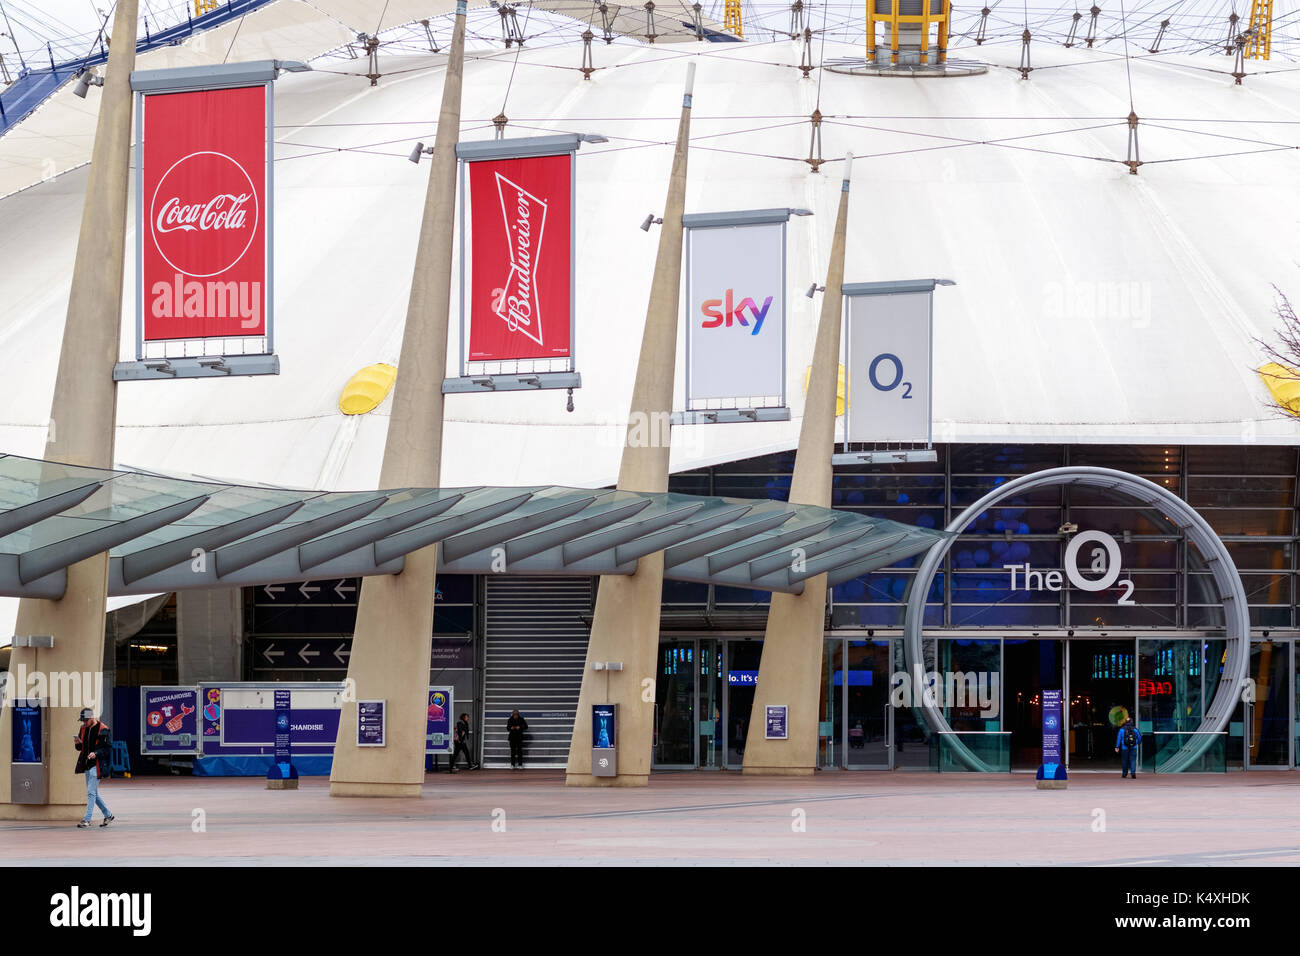 London, UK - August 15, 2017 - Peninsula Square leading to The O2 Arena entrance, a large entertainment venue on the Greenwich peninsula Stock Photo